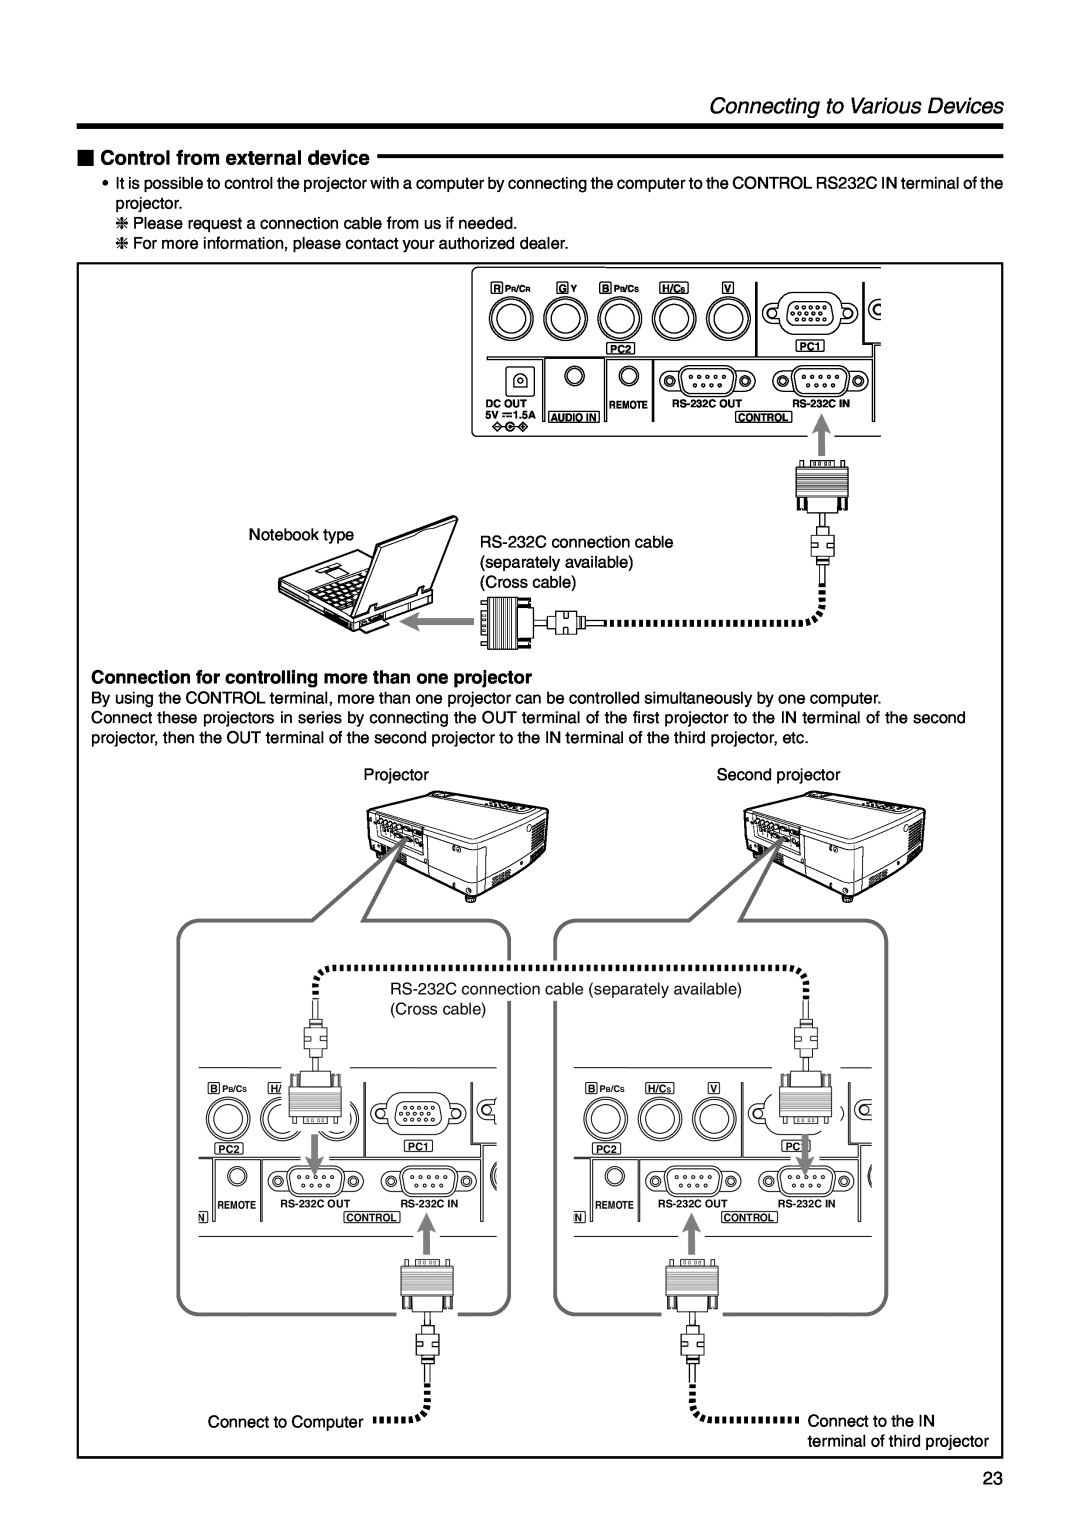 Dukane 28A9017 user manual Connecting to Various Devices,  Control from external device 